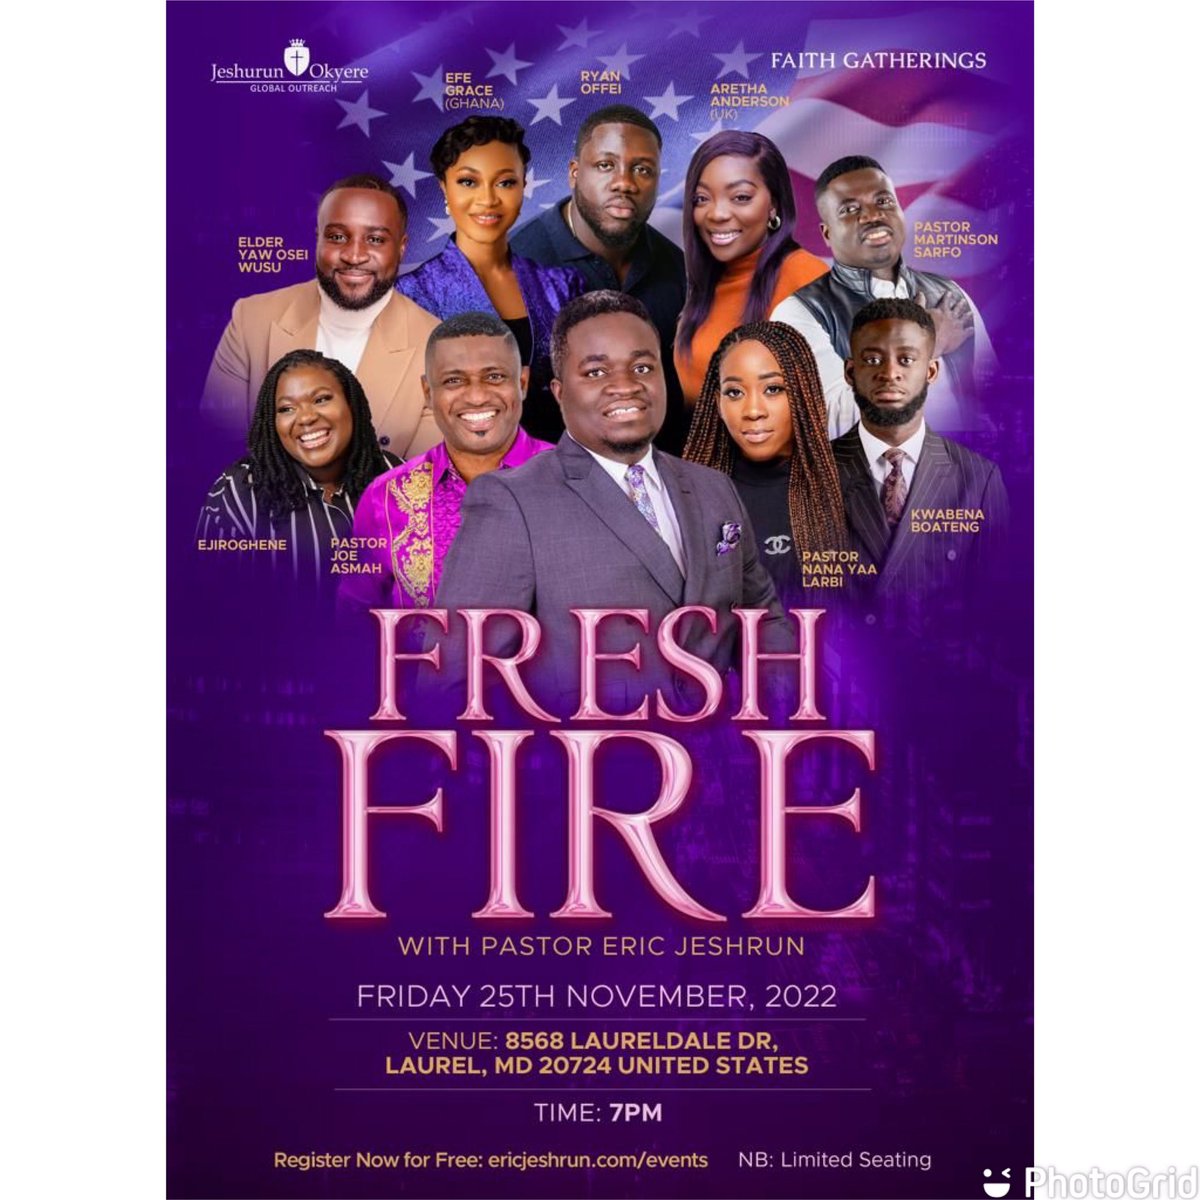 Fresh Fire is coming to the USA and you don’t want to miss out!!!!! Nov. 25 (Black Friday) 7pm sharp Venue: 8568 Laureldale Dr., Laurel, Maryland 20724. Registration is ongoing and free (ericjeshrun.com/events) #FreshFireUSA #FaithGathering @JeshrunEric @efegracemusic